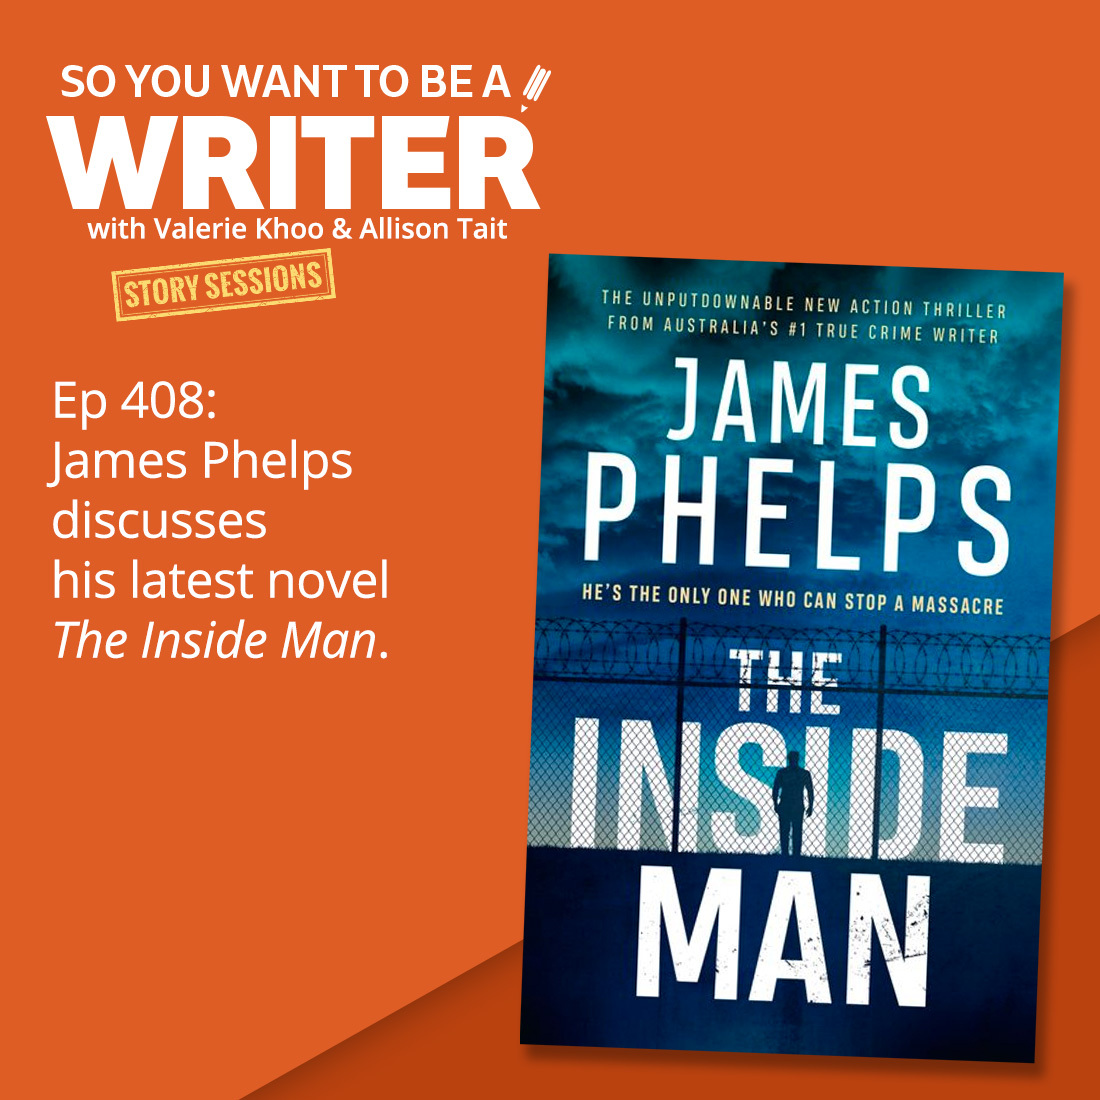 WRITER 408: James Phelps discusses his latest novel 'The Inside Man' [Story Sessions series]